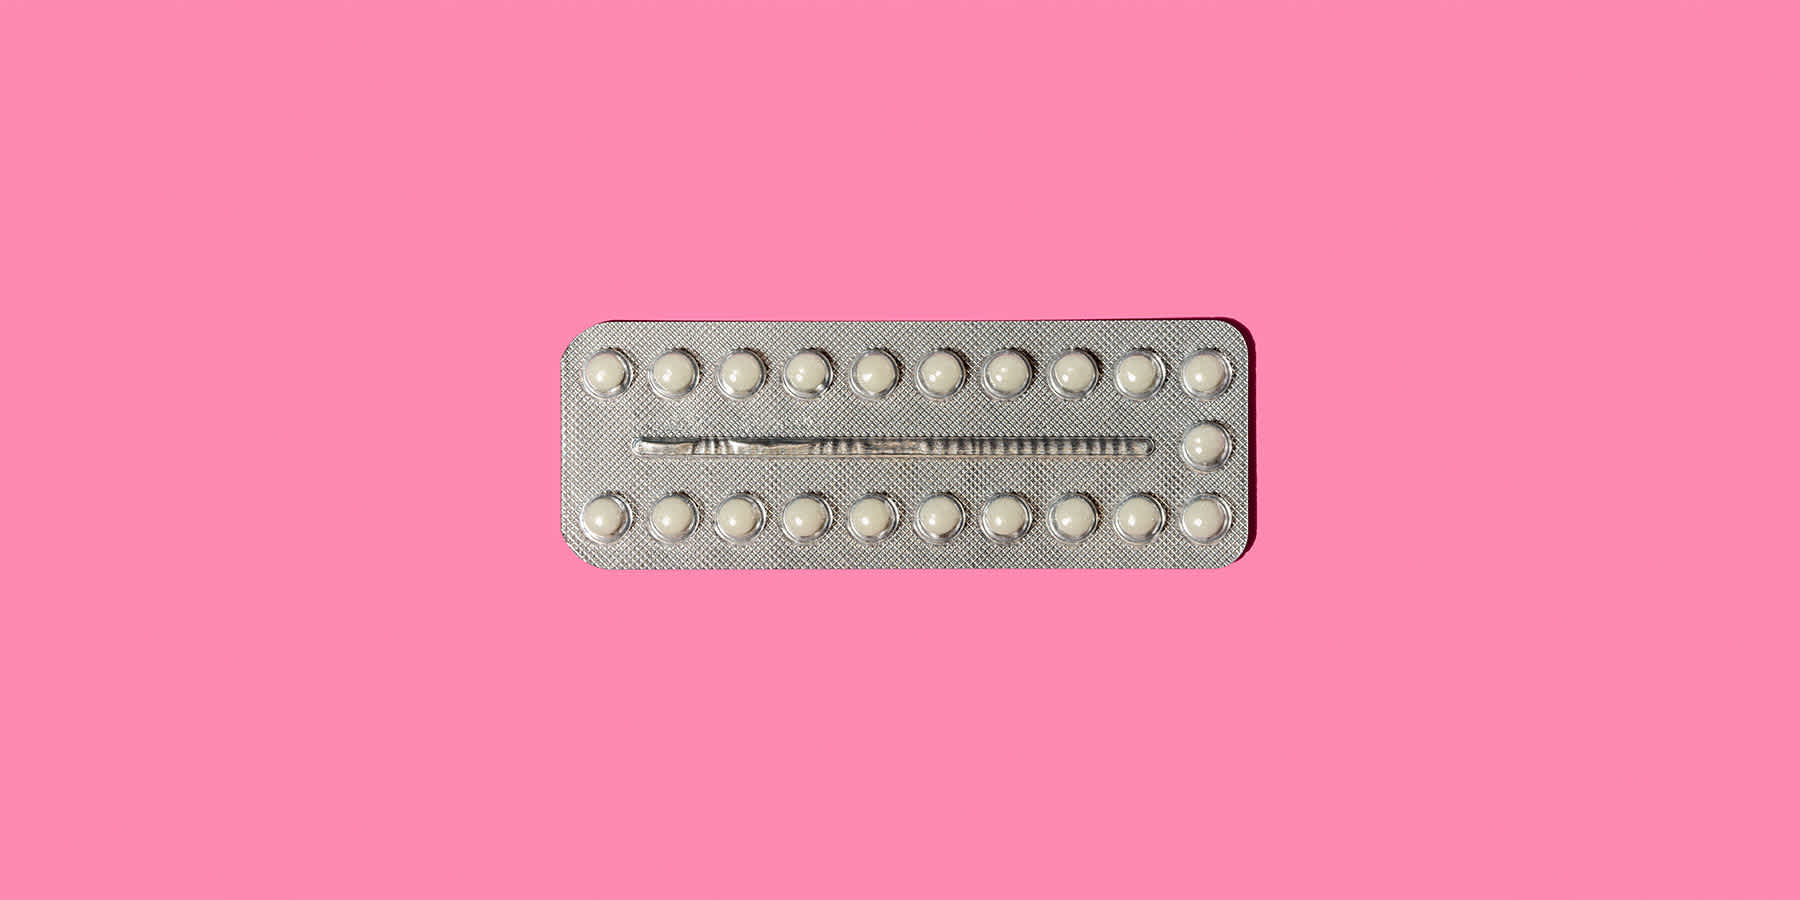 Packet of oral birth control pills against a pink background